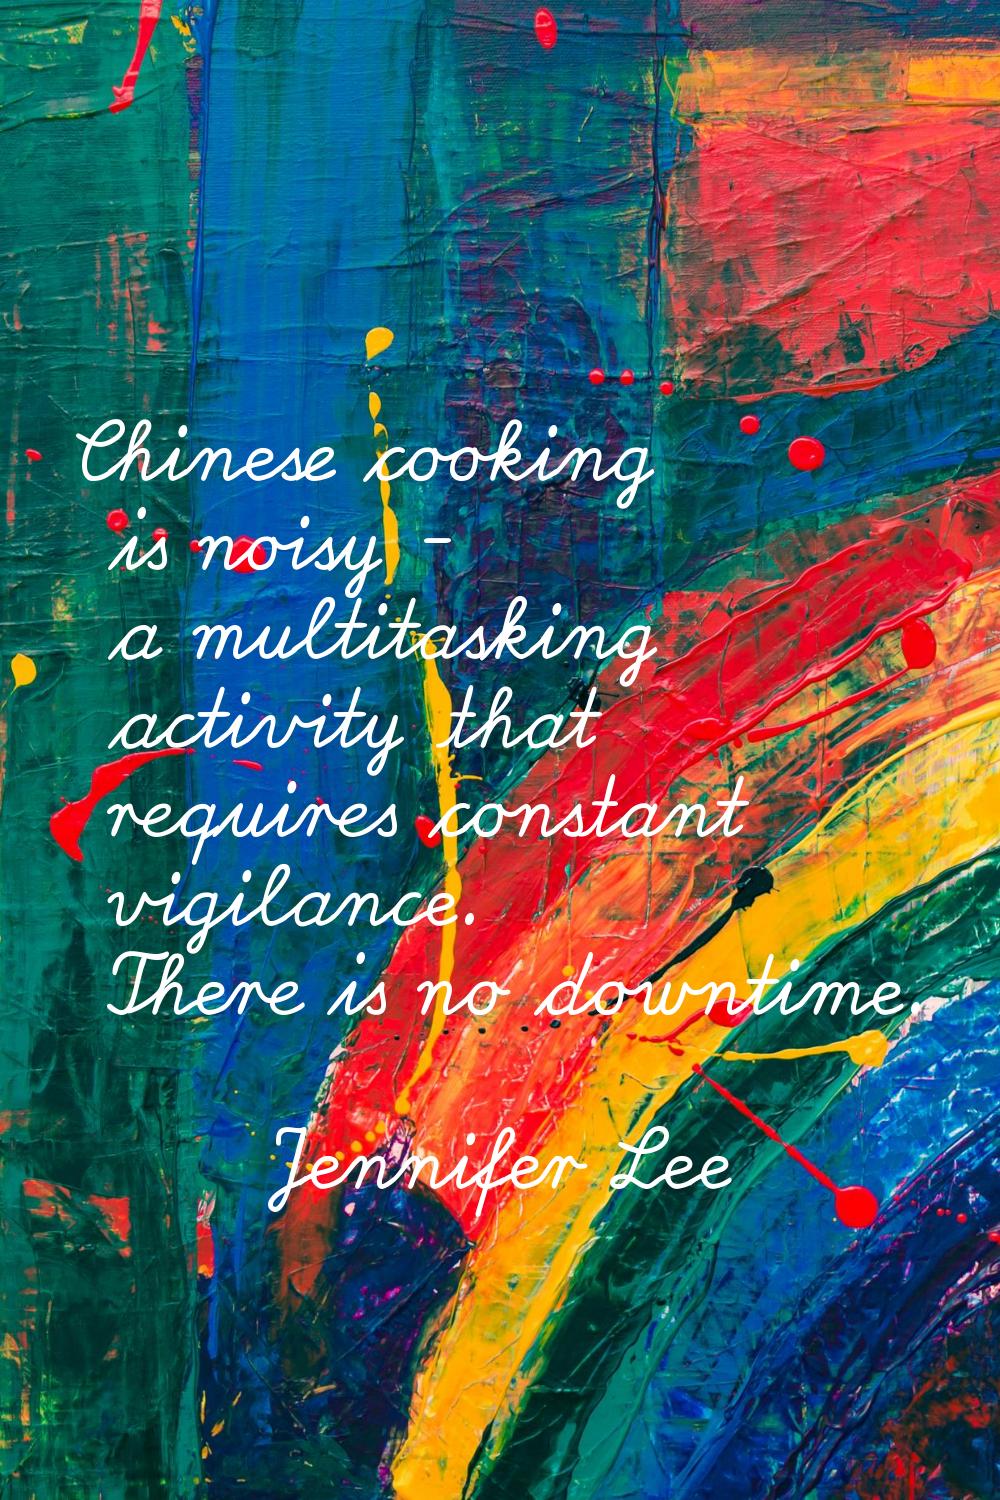 Chinese cooking is noisy - a multitasking activity that requires constant vigilance. There is no do